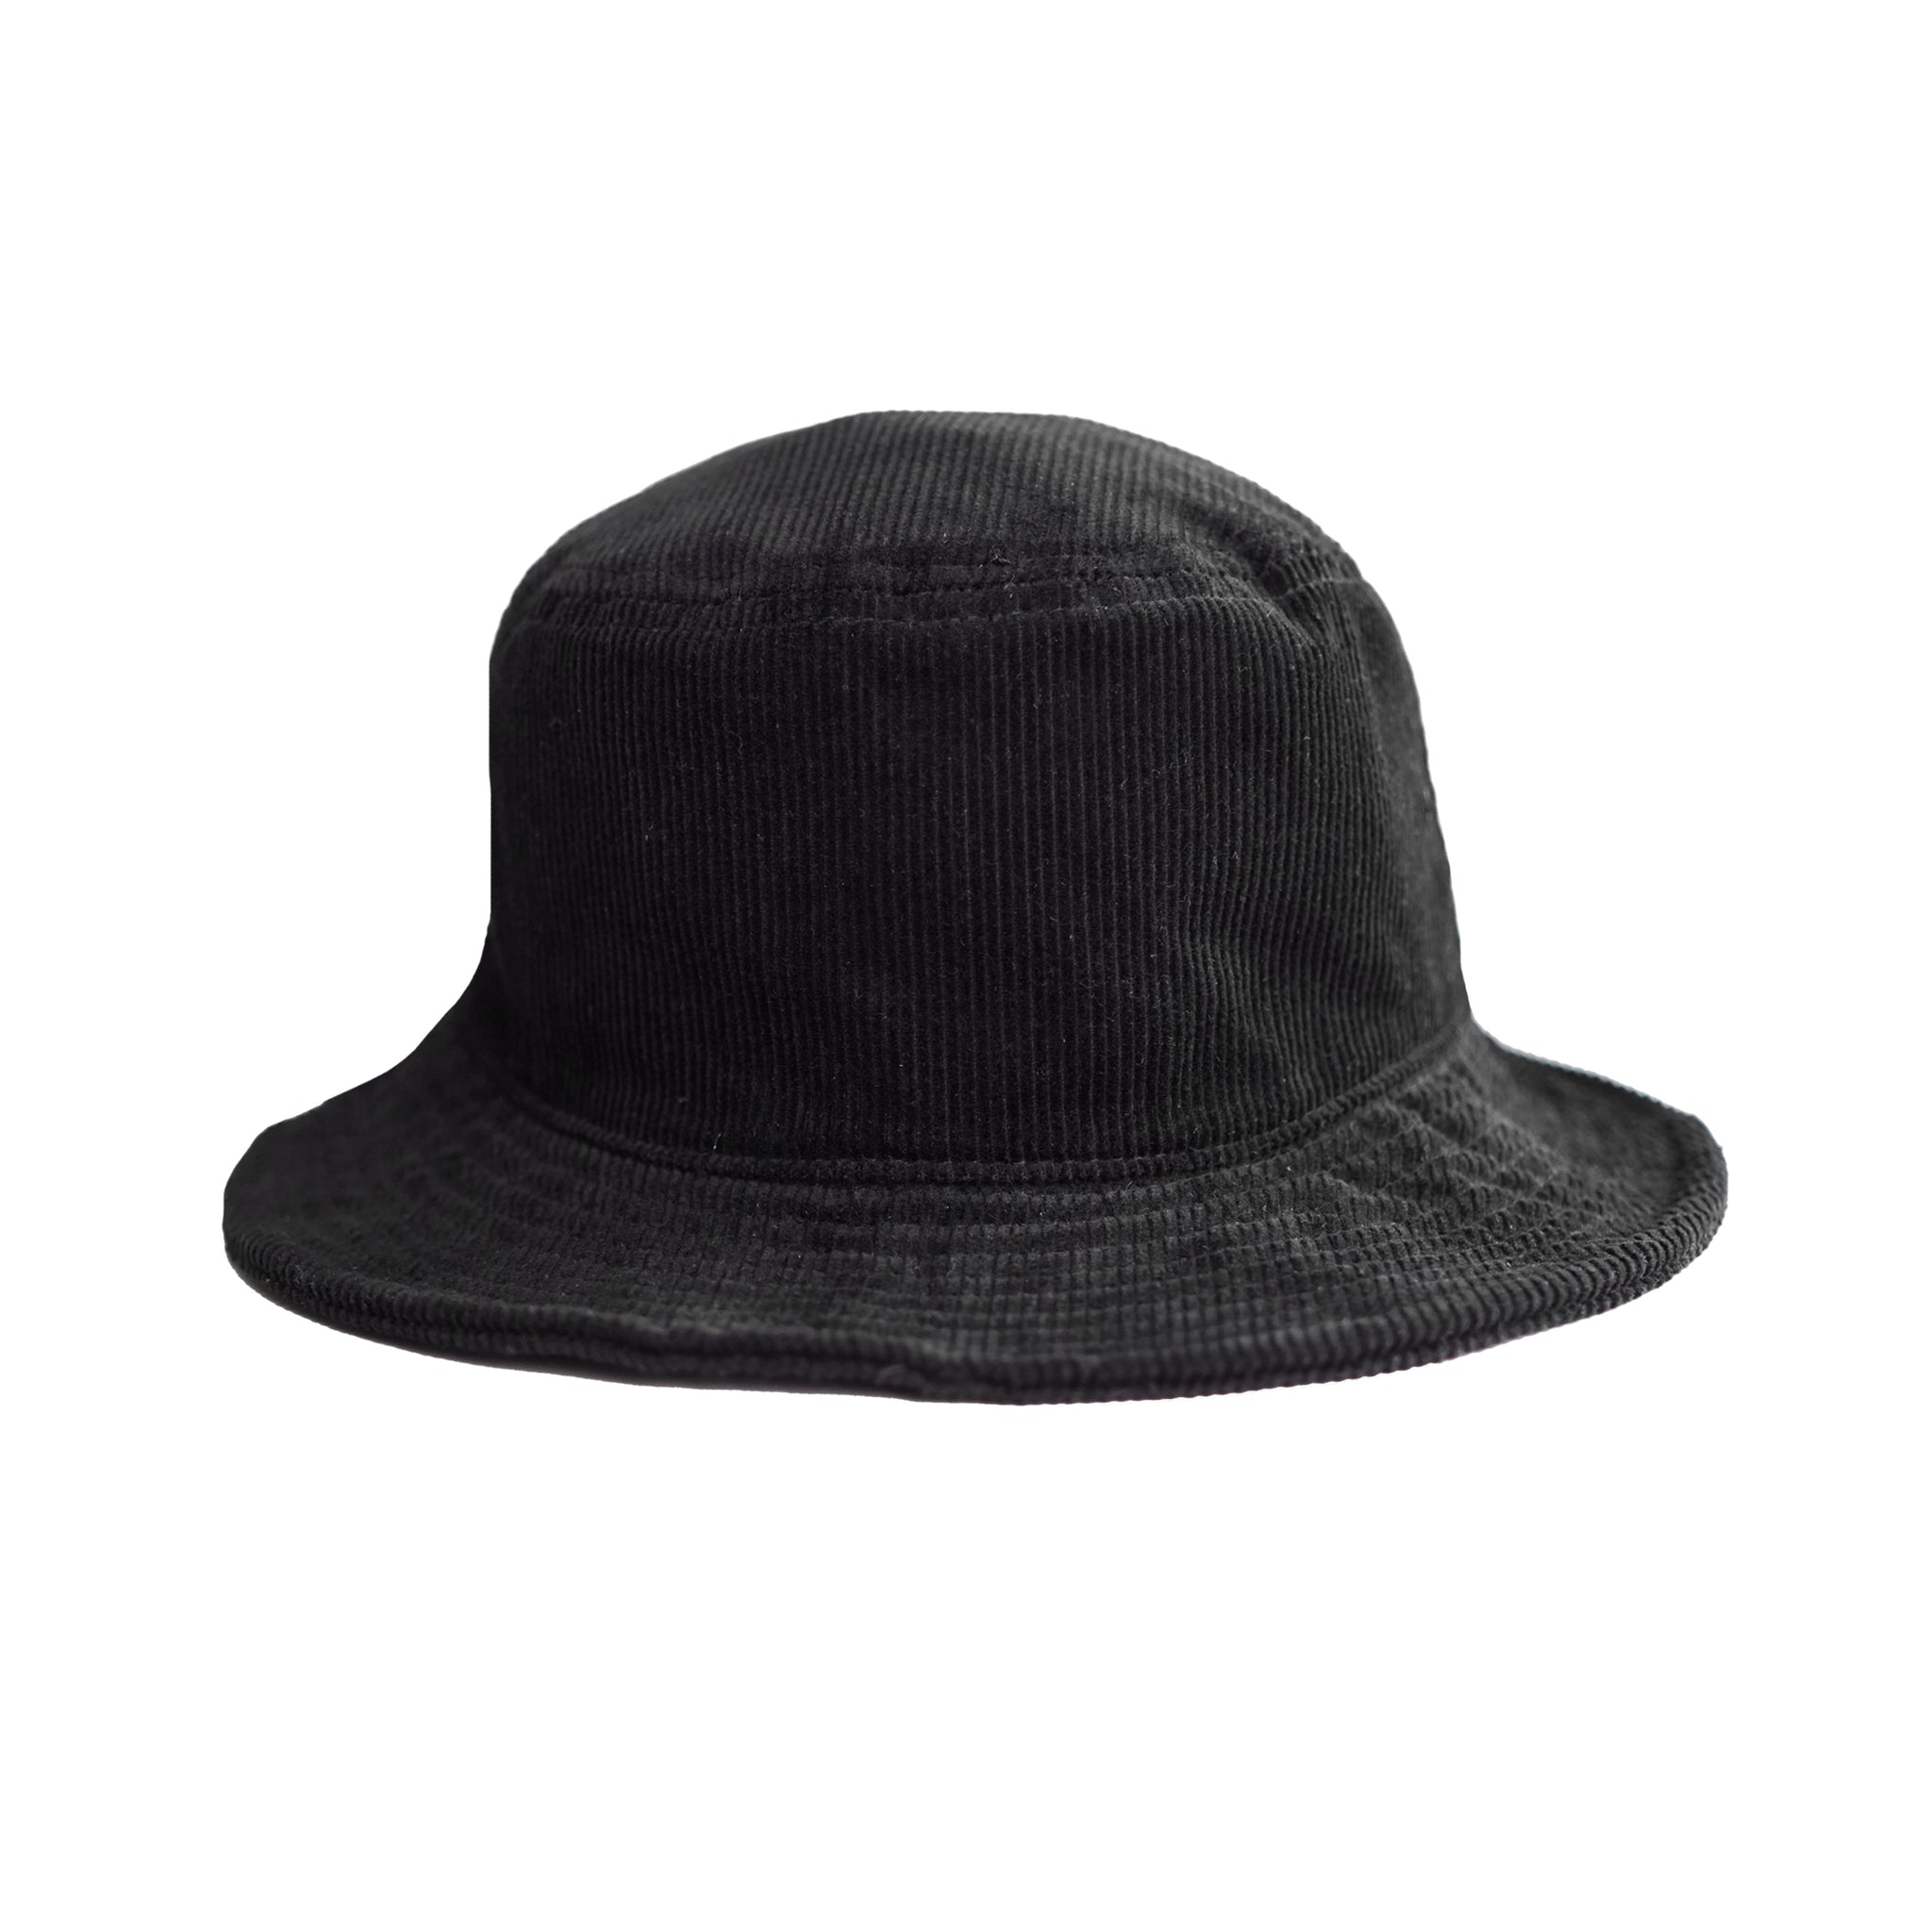 Thesis Bucket Hats - Thesis Title Ideas for College